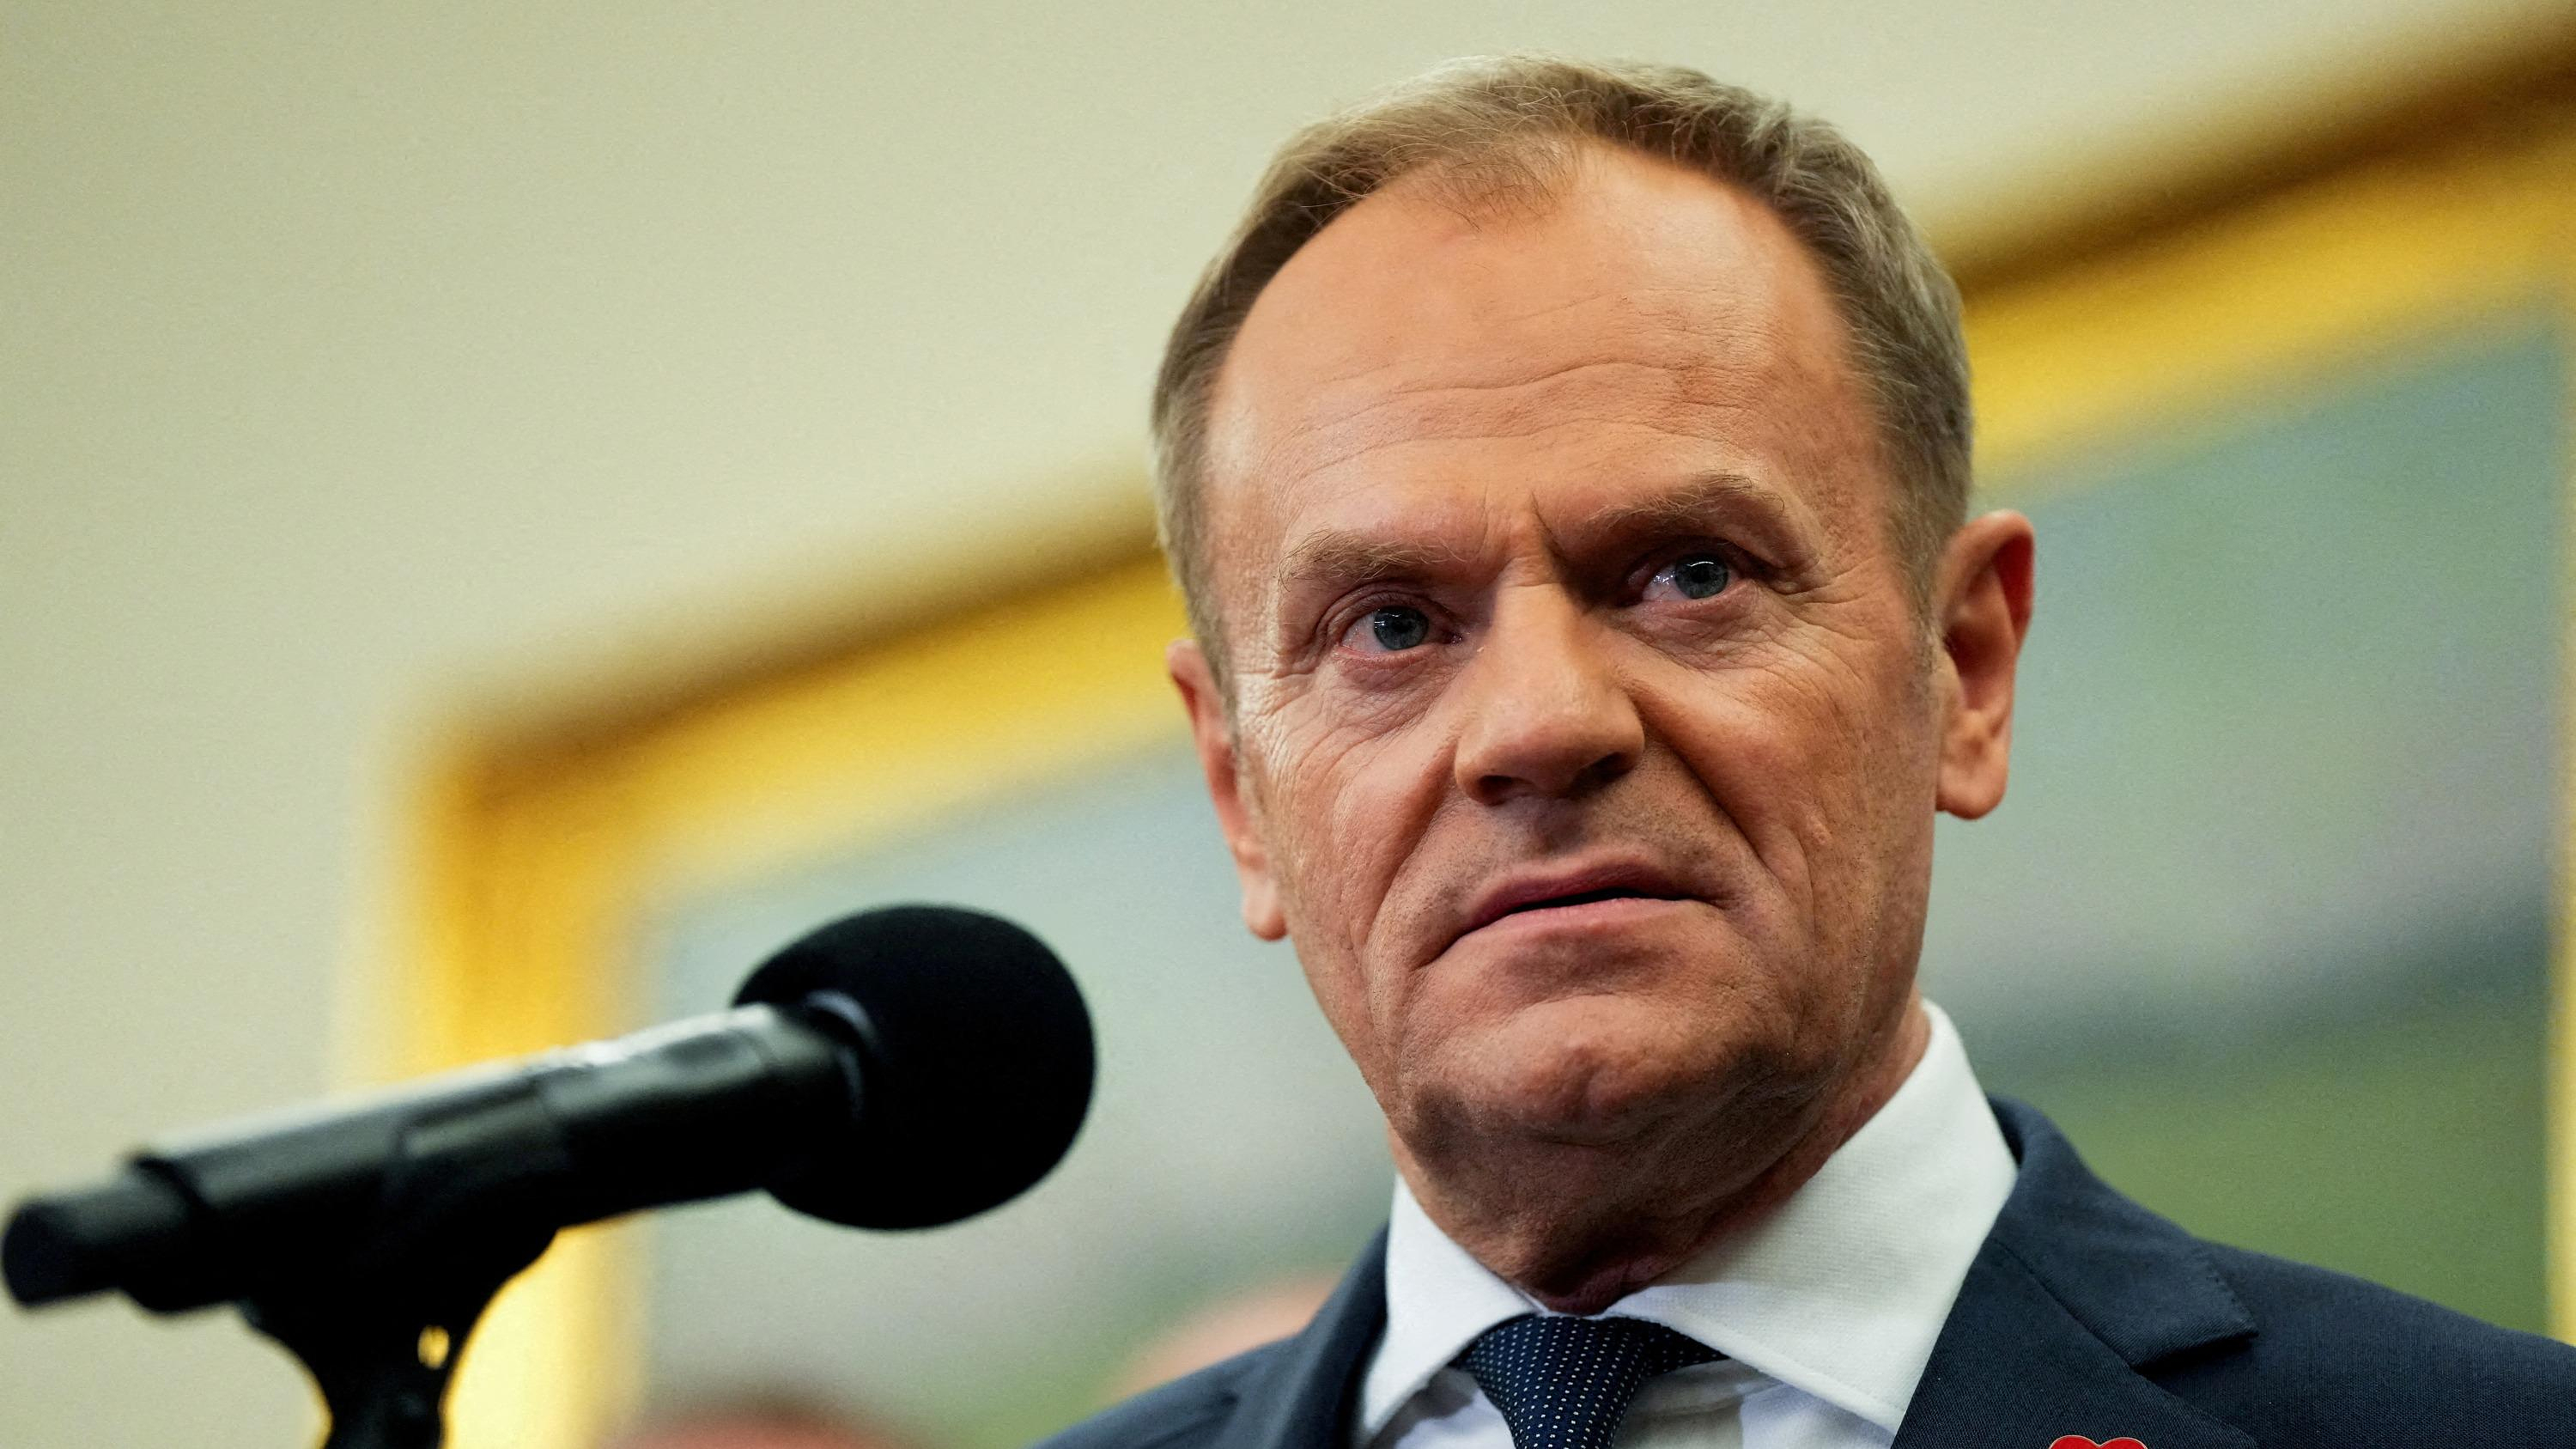 Poland: Donald Tusk grappling with constitutional judges